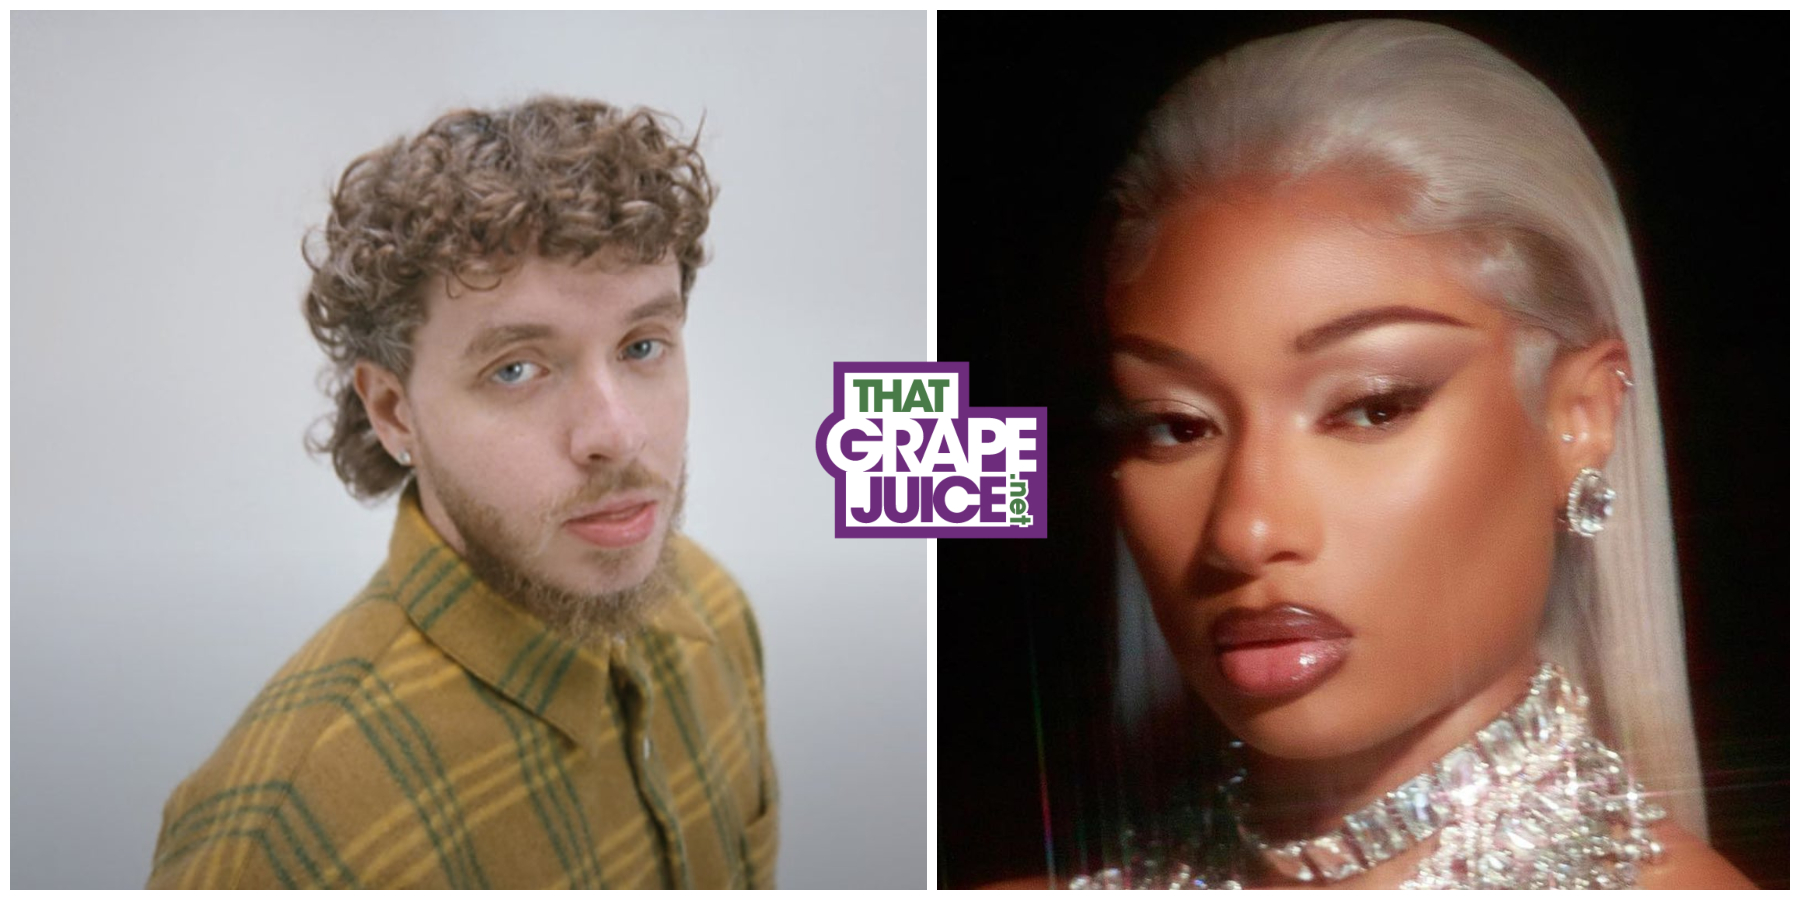 Hot 100: Jack Harlow’s ‘Lovin’ on Me’ Moves Megan Thee Stallion’s ‘Hiss’ from #1